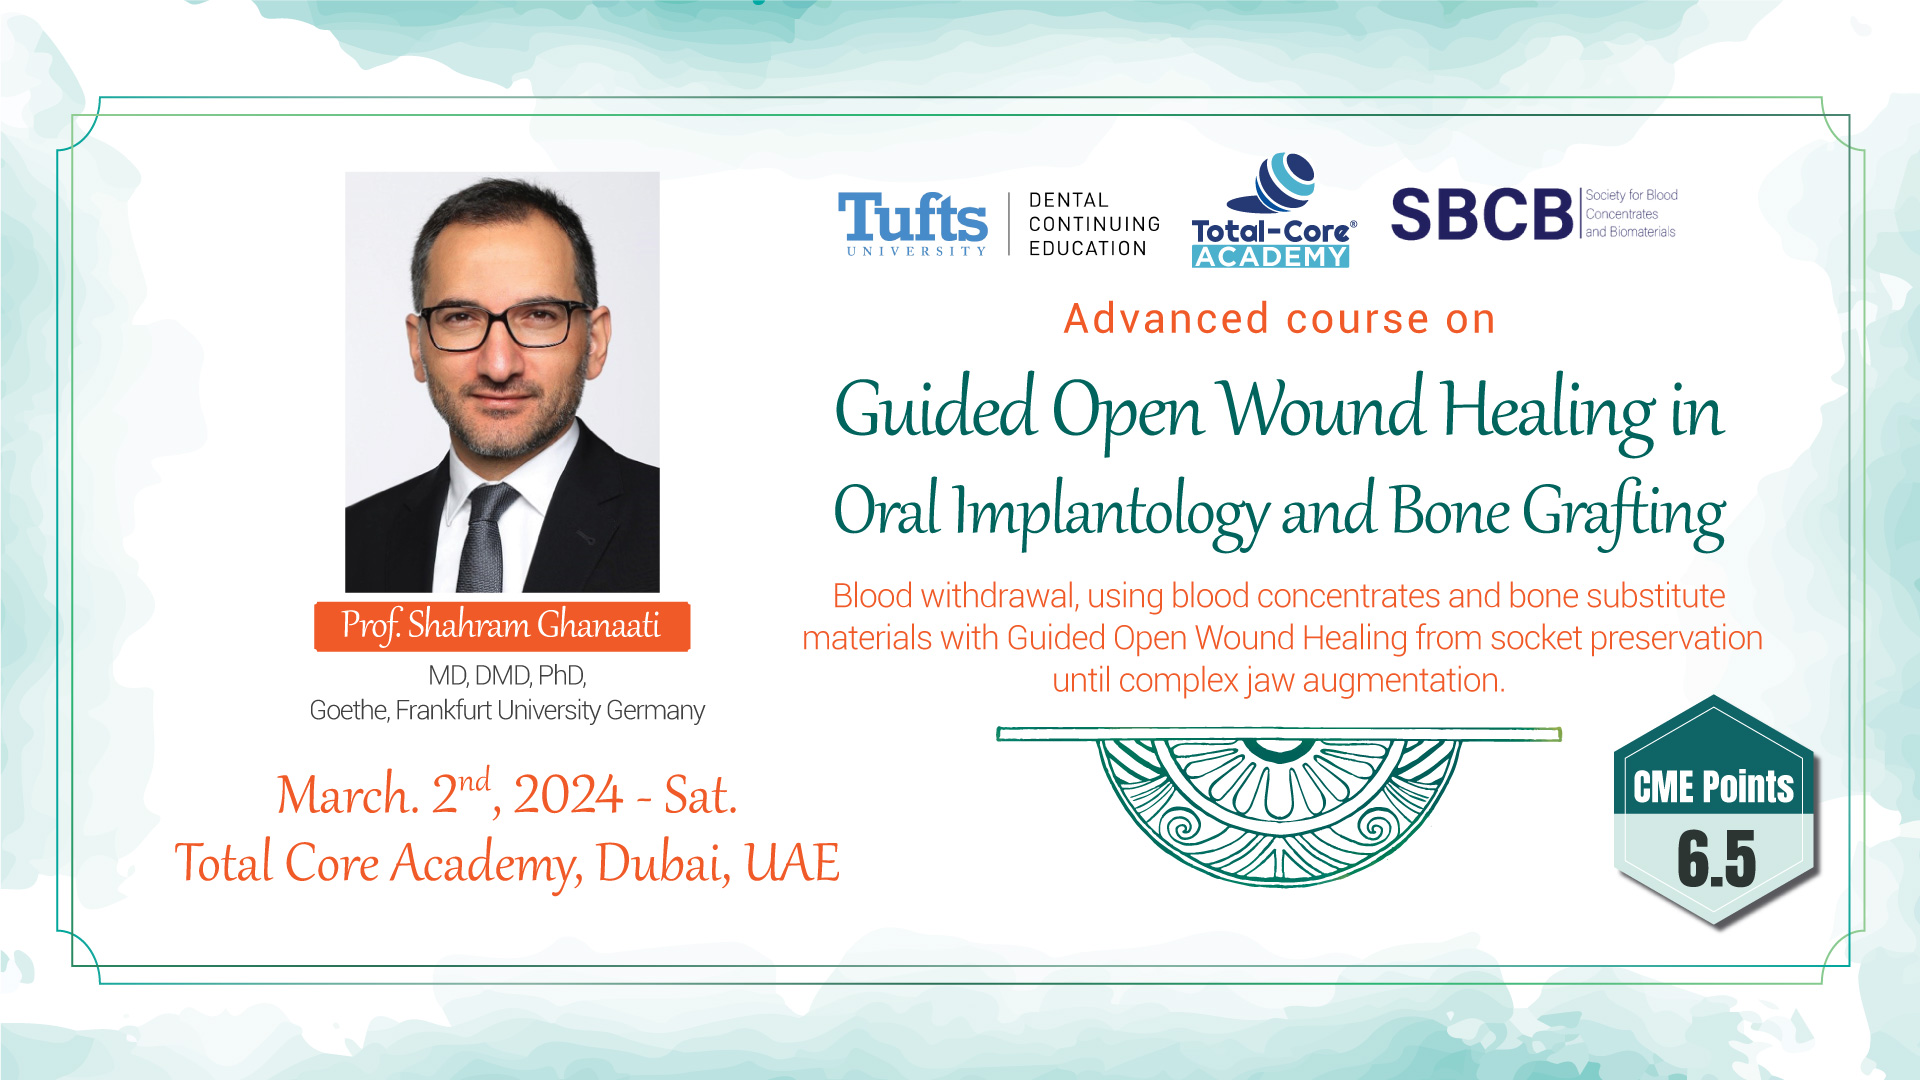 >Advanced course on Guided Open Wound Healing in Oral Implantology and Bone Grafting